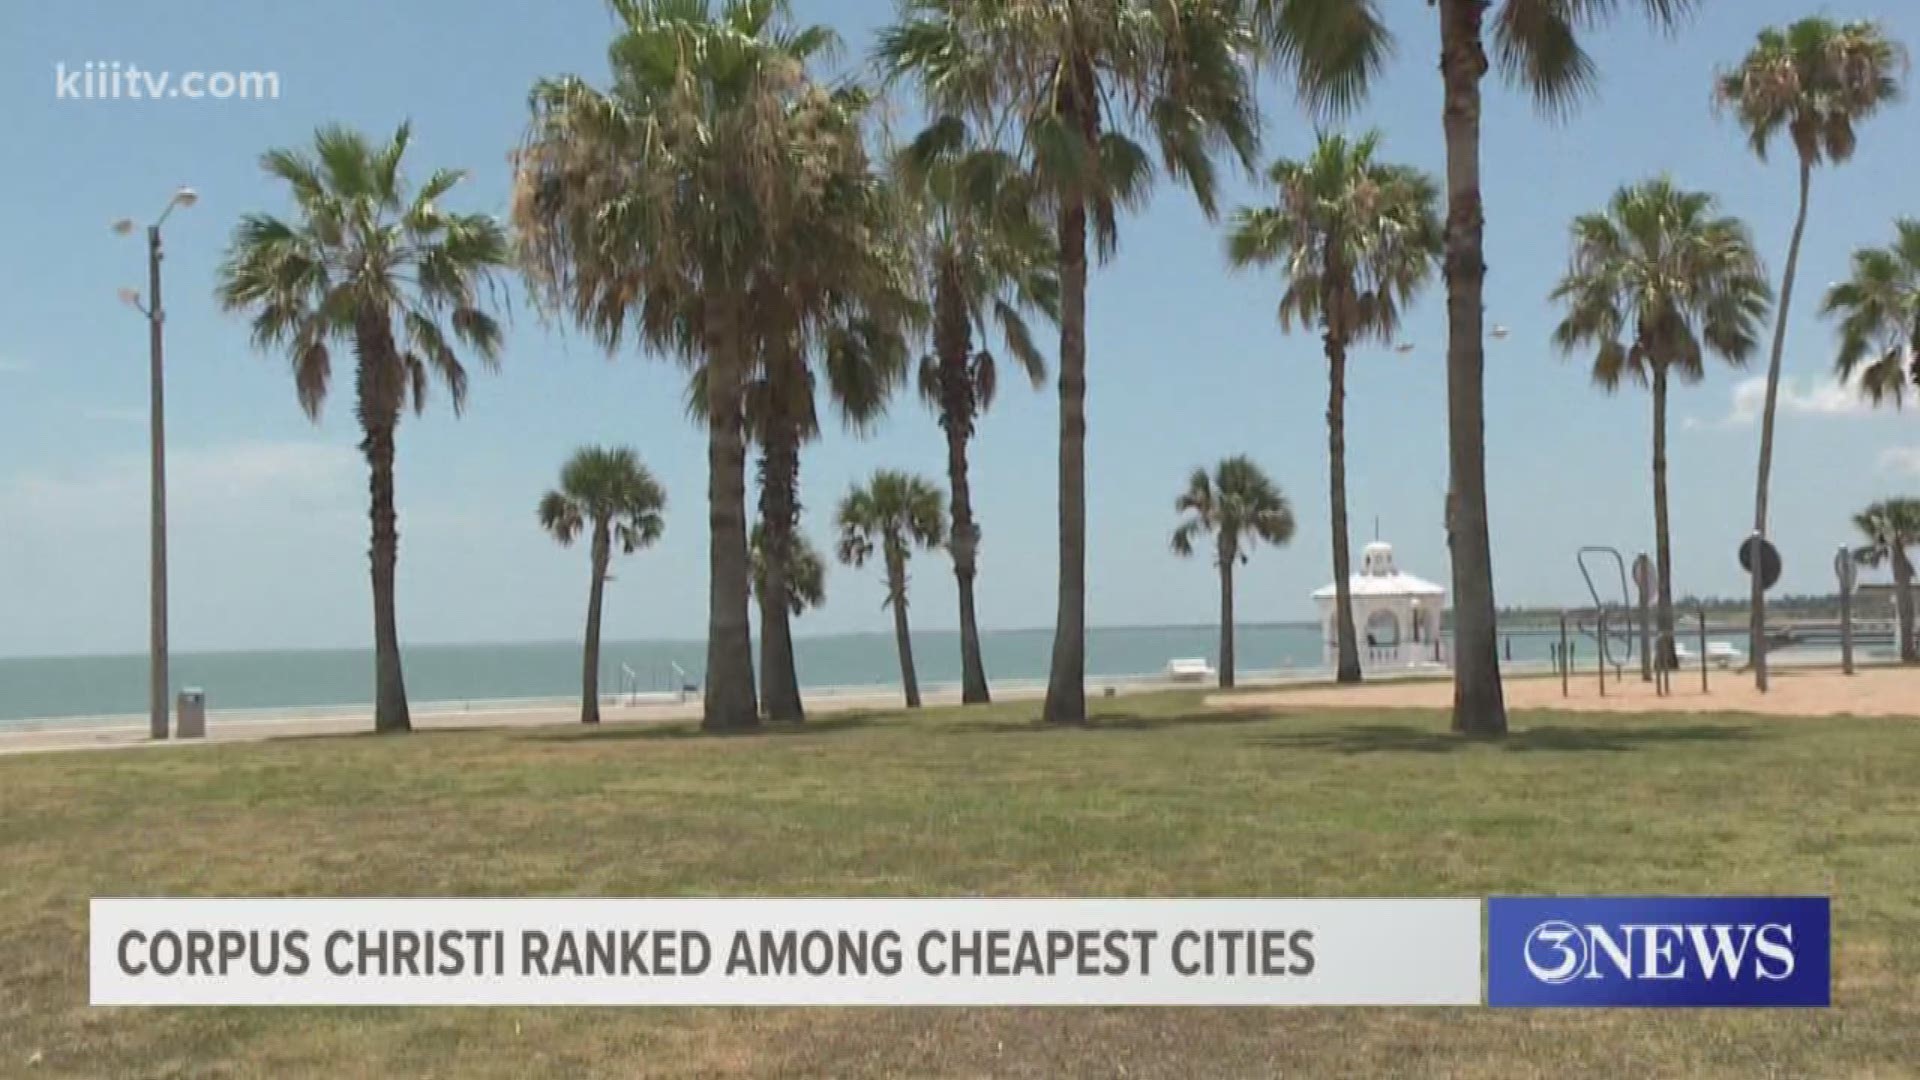 Corpus Christi has a new economic ranking, and it's favorable for tourist who are considering moving to the area.